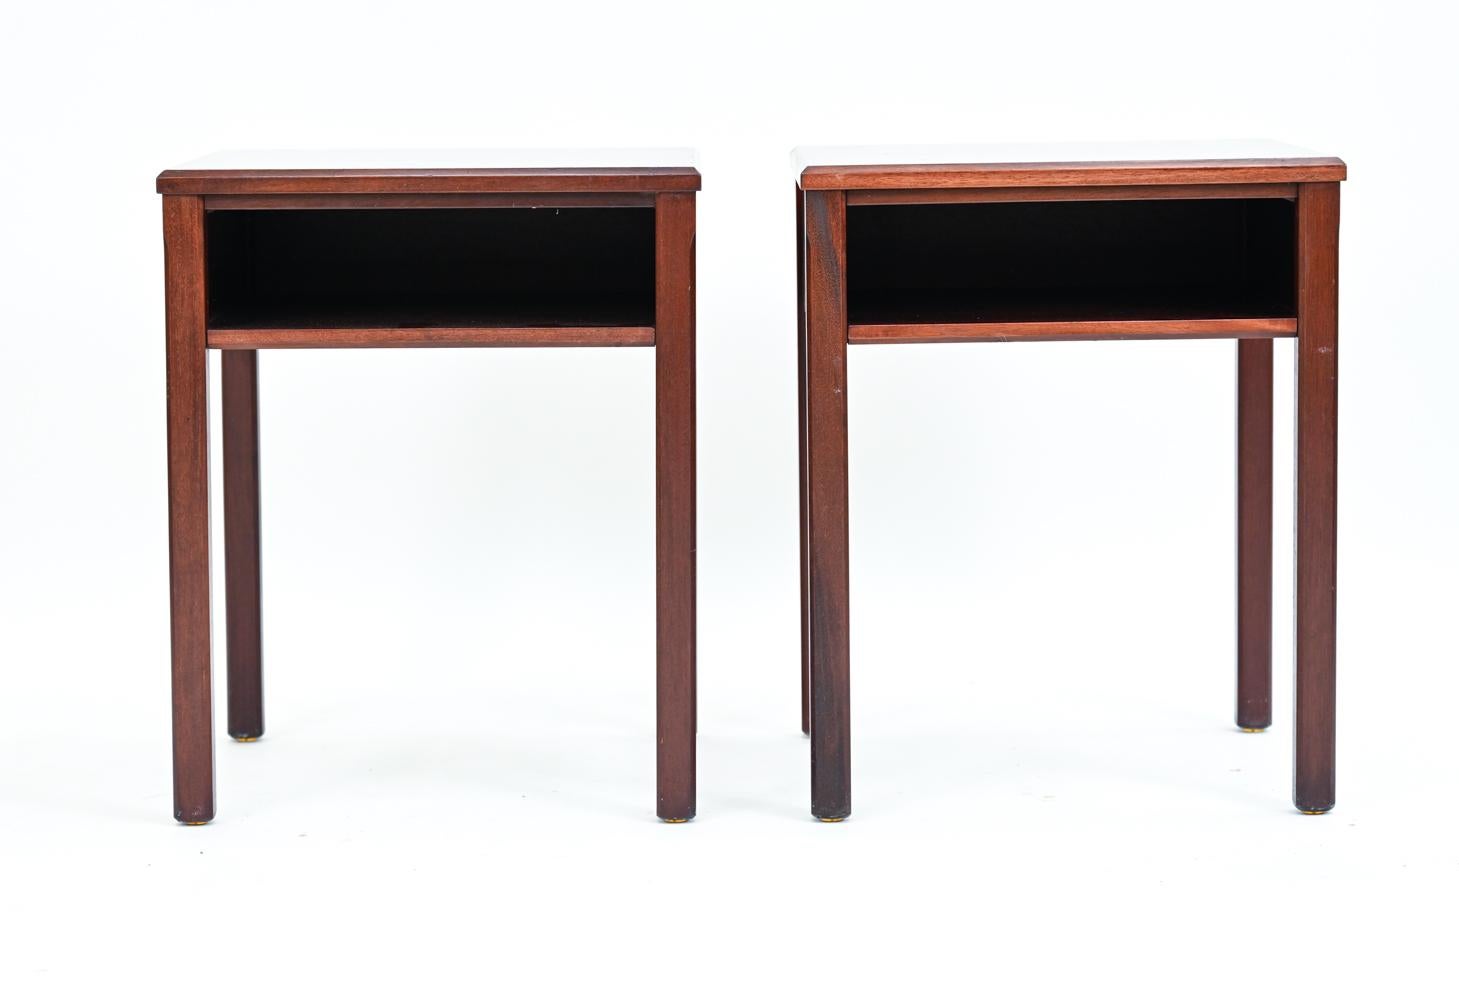 A pair of Danish mid-century nightstands or end tables featuring single open shelf and single fluted edge to legs. These traditional-style tables, c. 1950's, are in quality mahogany.

With Lysberg, Hansen, & Terp label underneath.